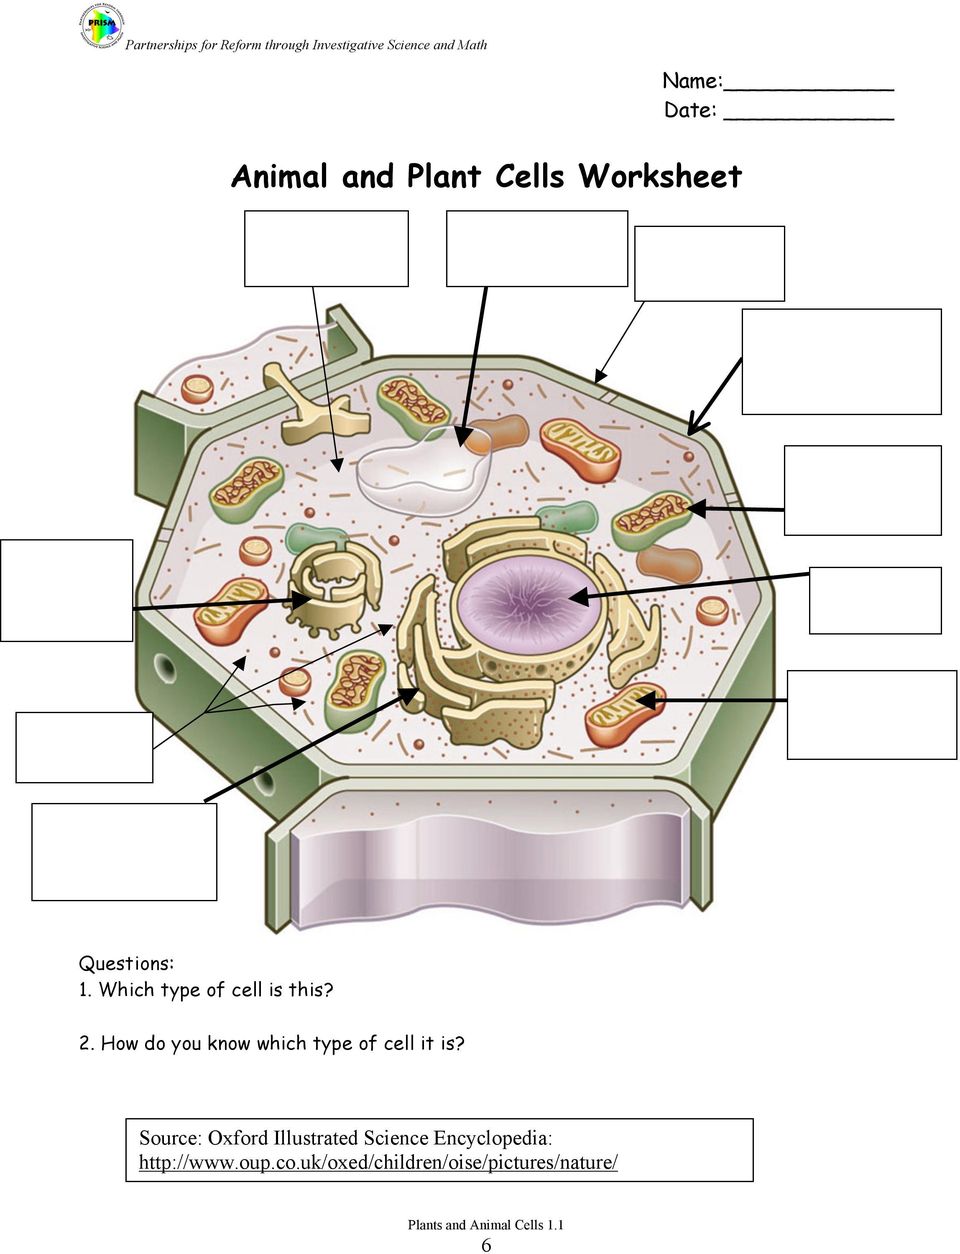 How do you know which type of cell it is?